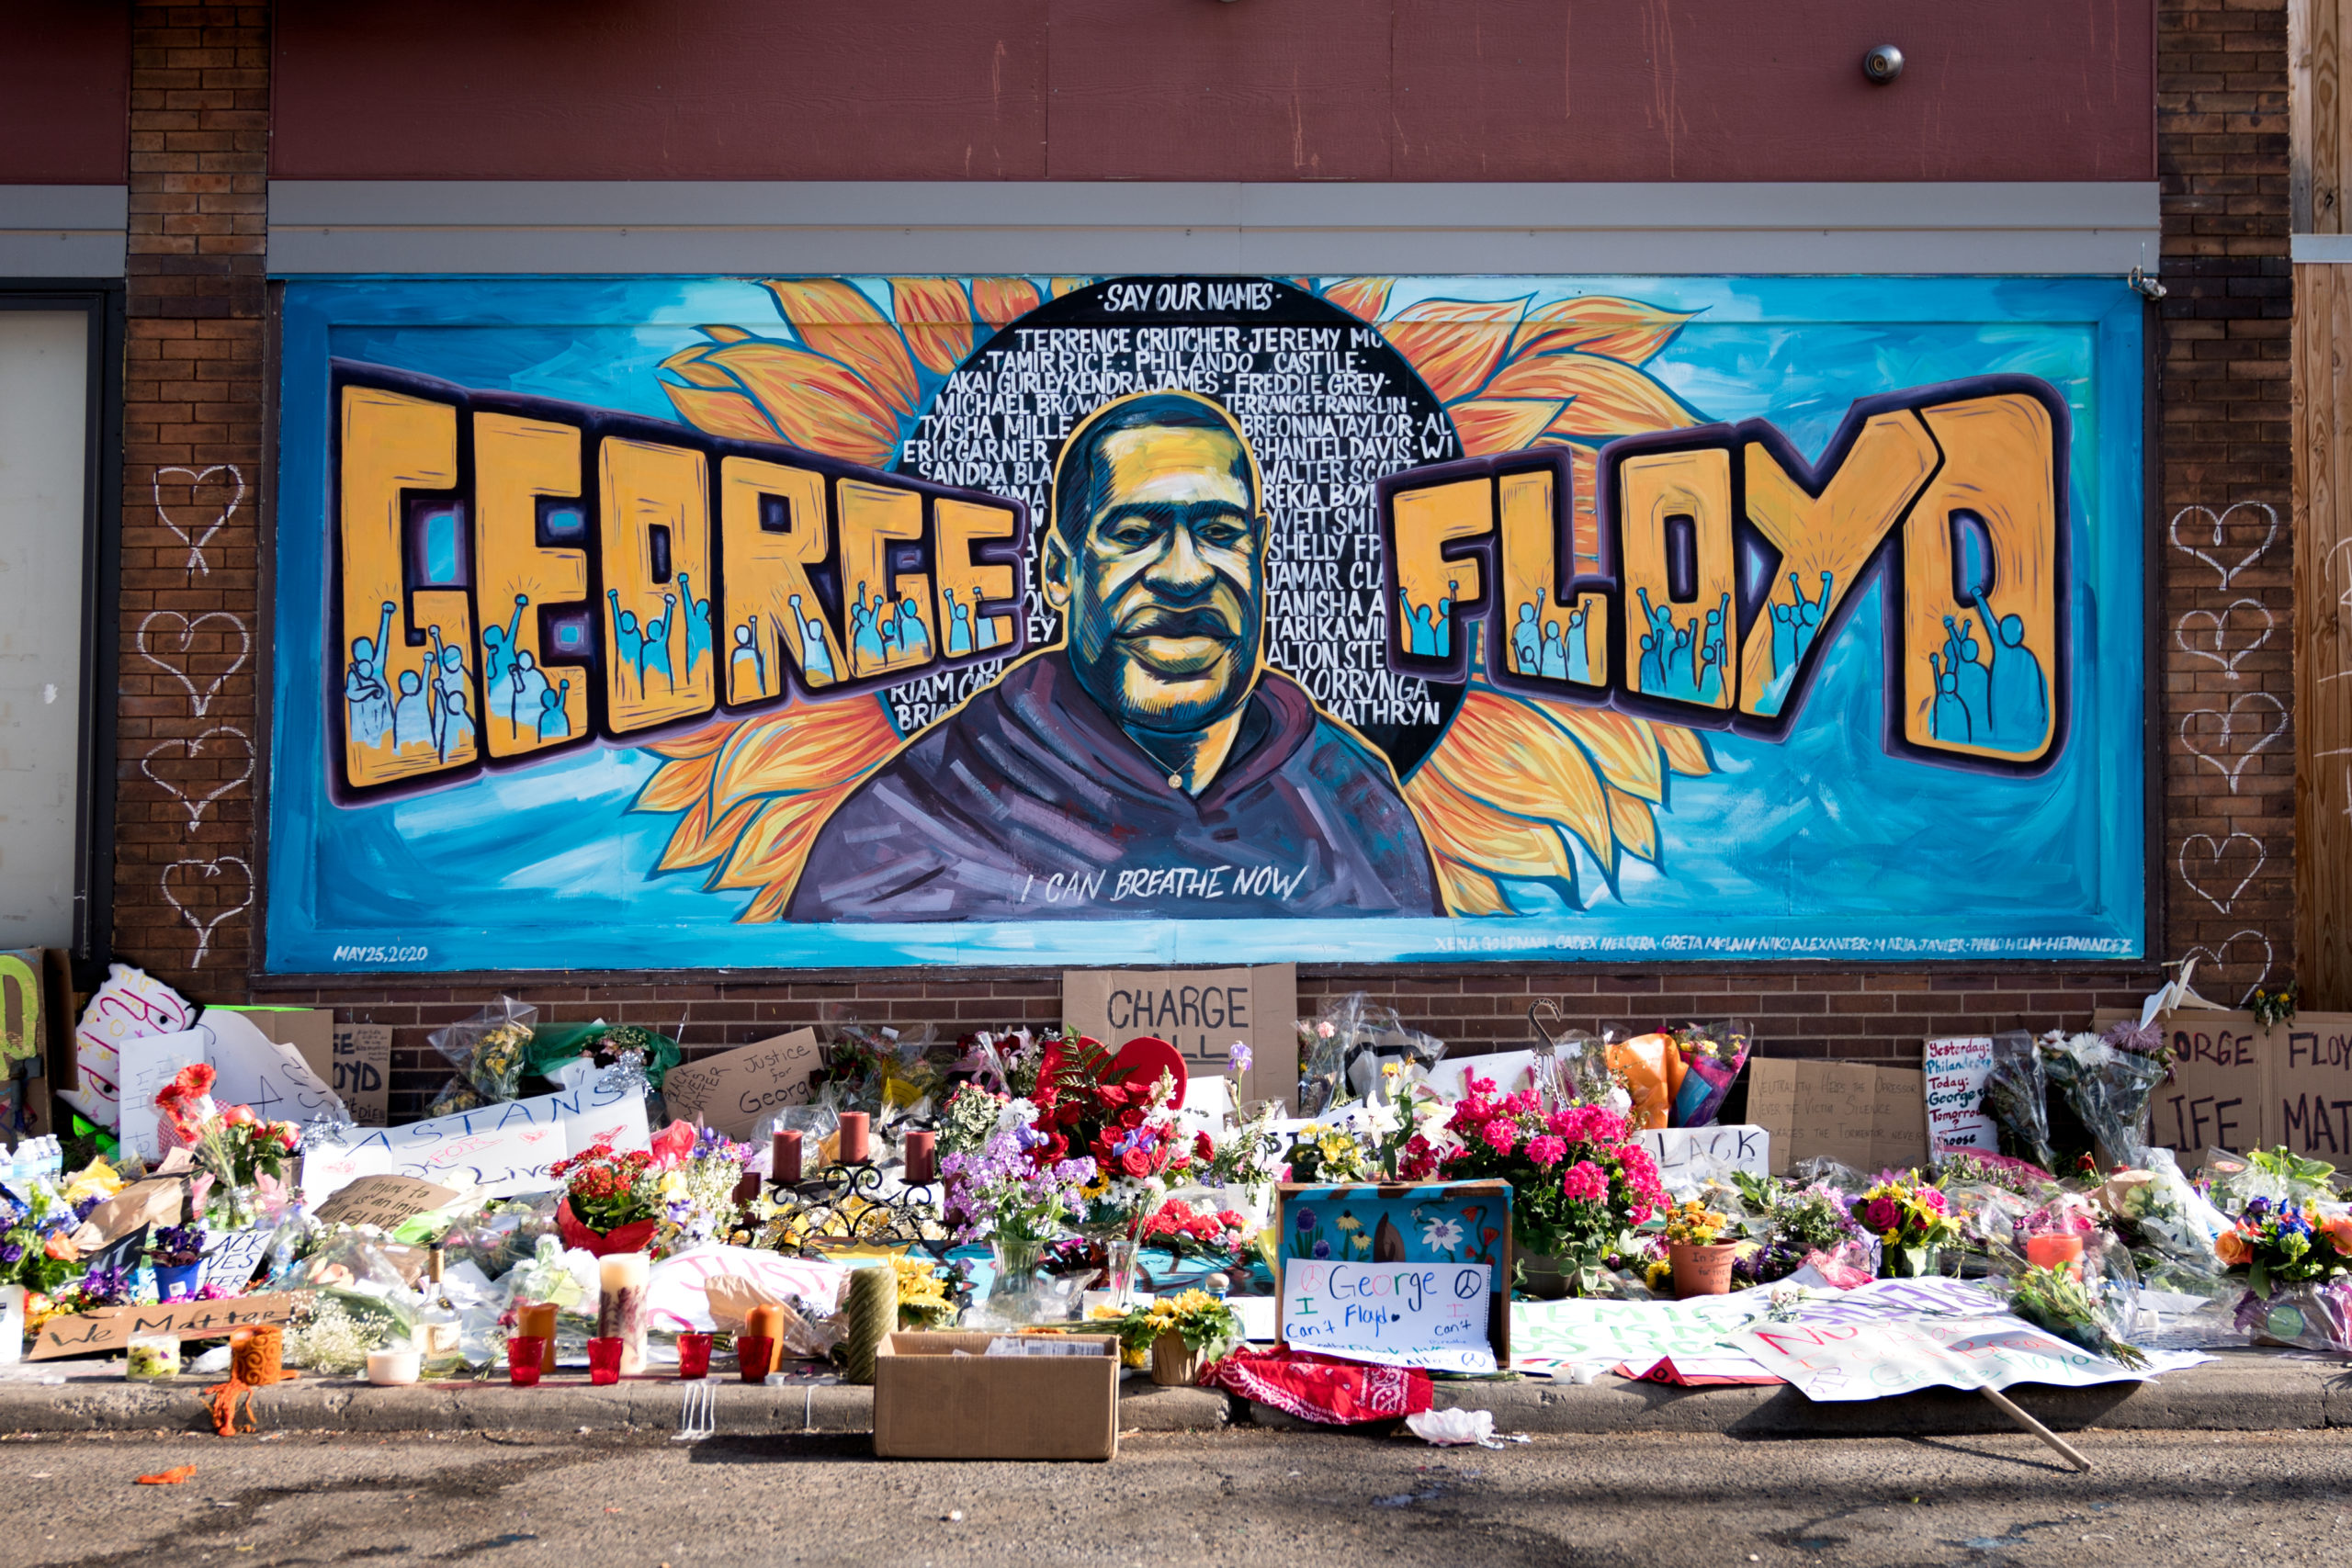 mural on the side of building with flowers and objects placed on ground as a memorial